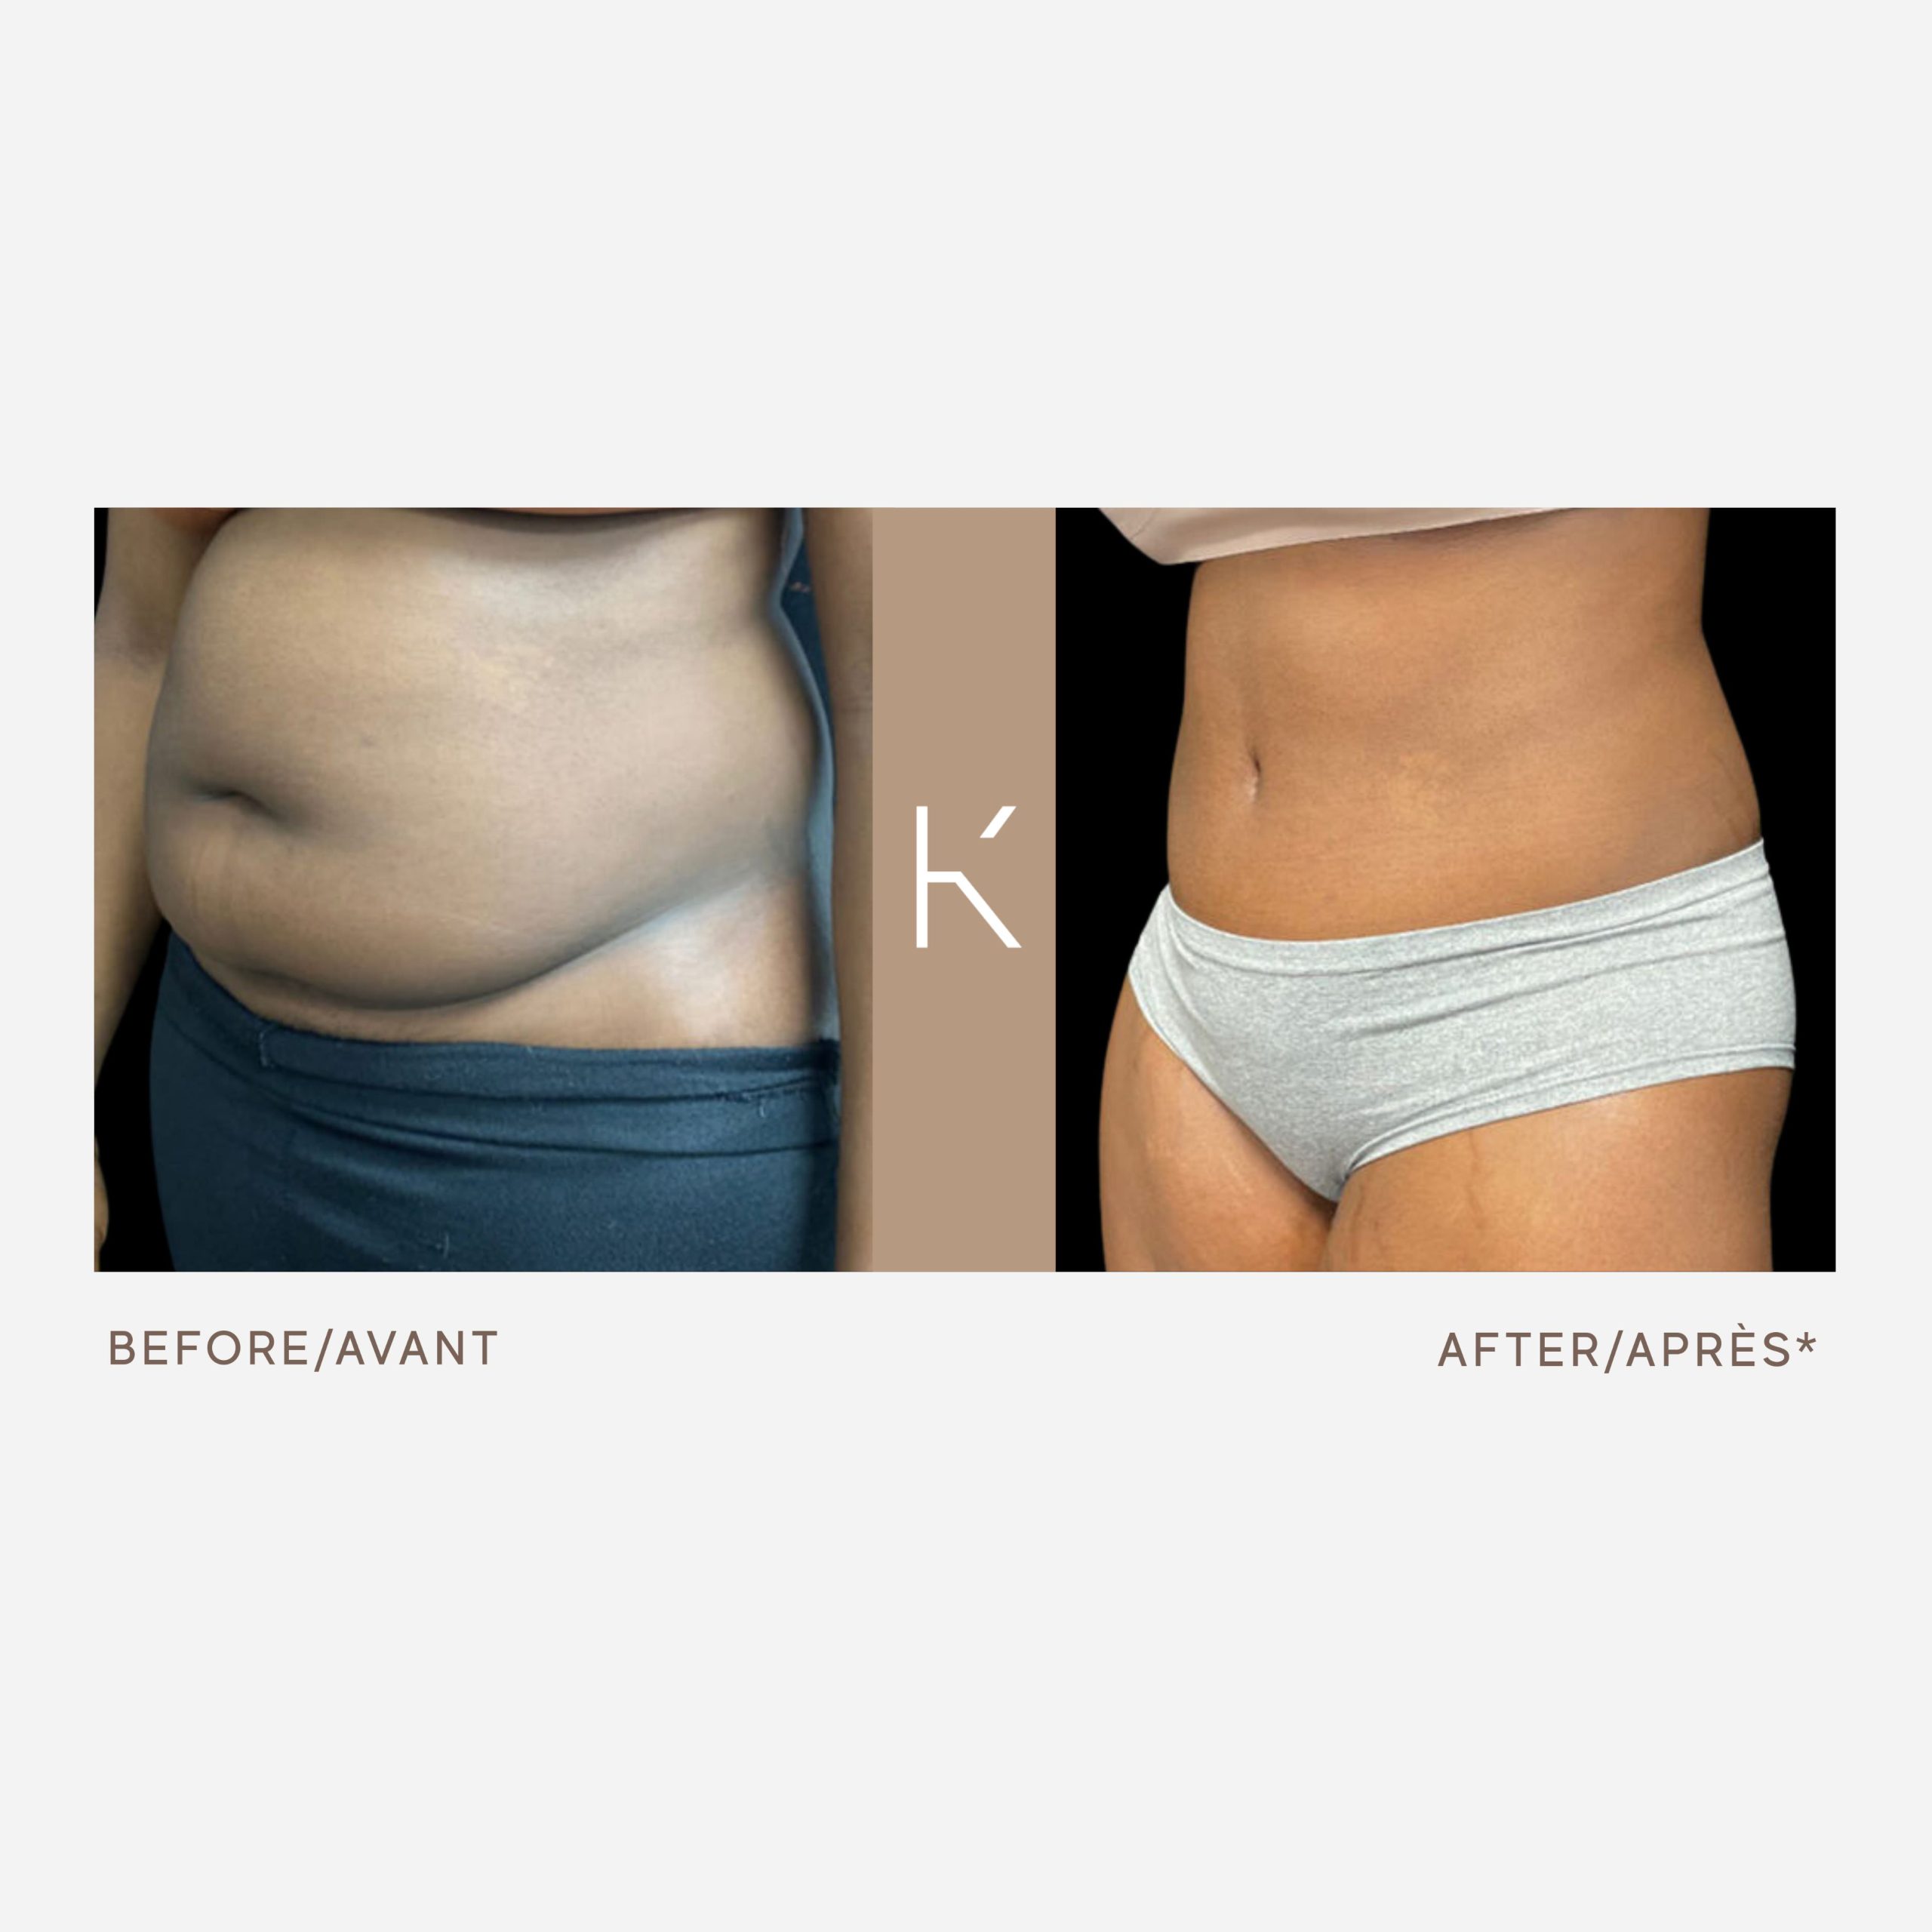 Transformation of the Week: Non-Invasive Mommy Tuck - The Body Squad